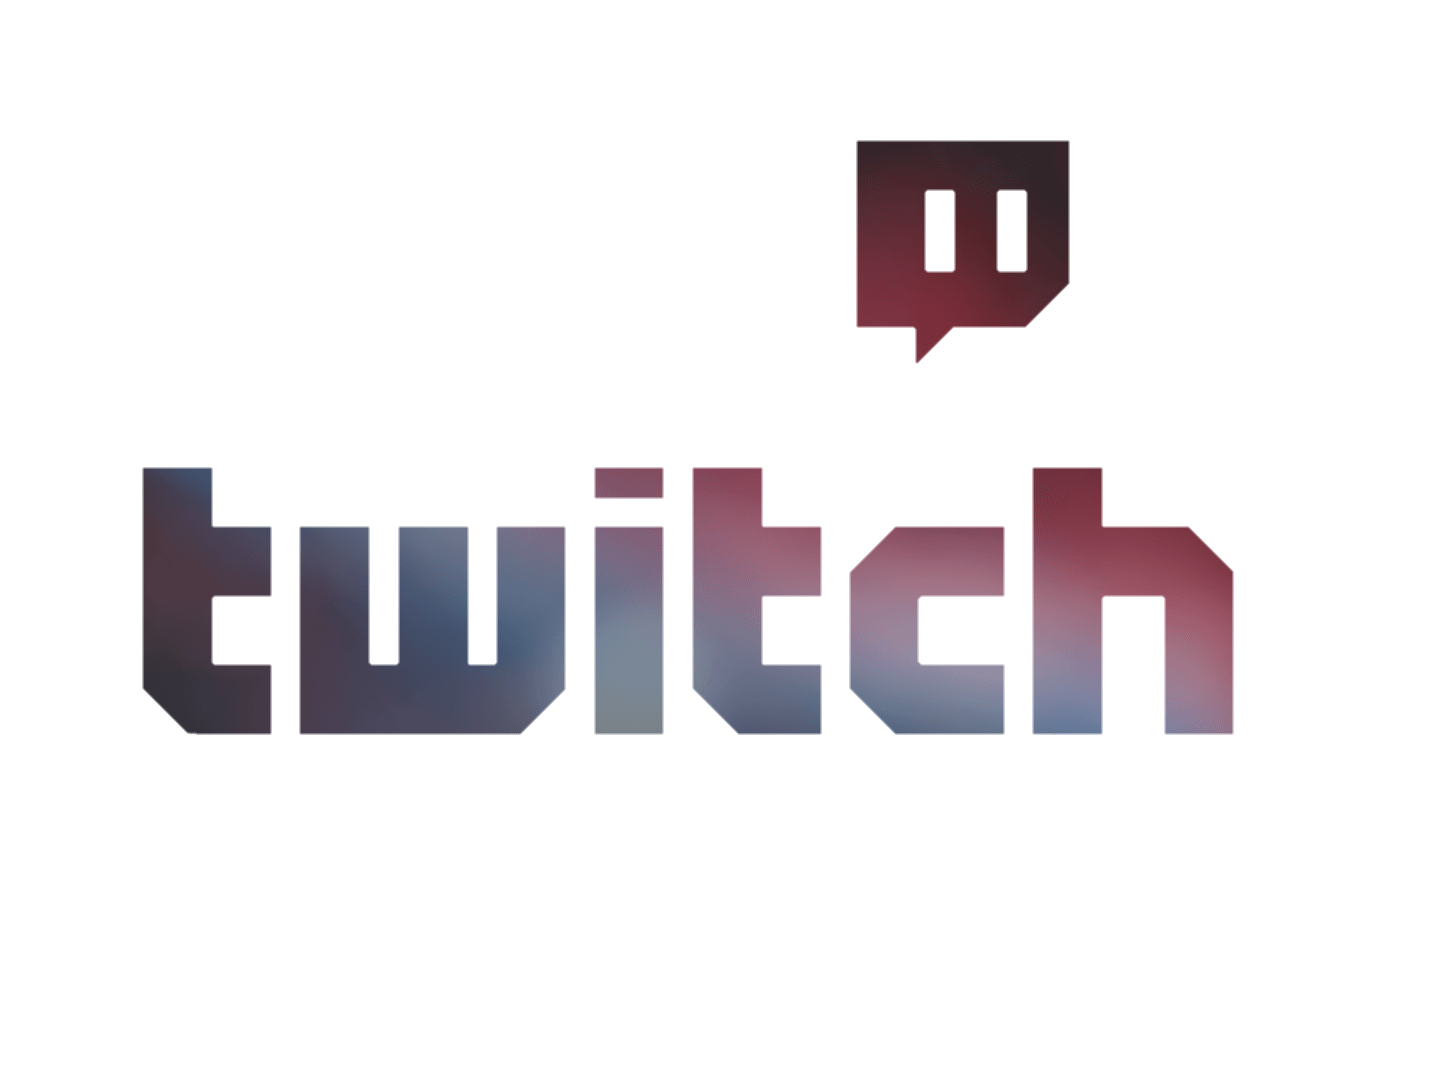 twitch-logo-png-from-pngfre-22